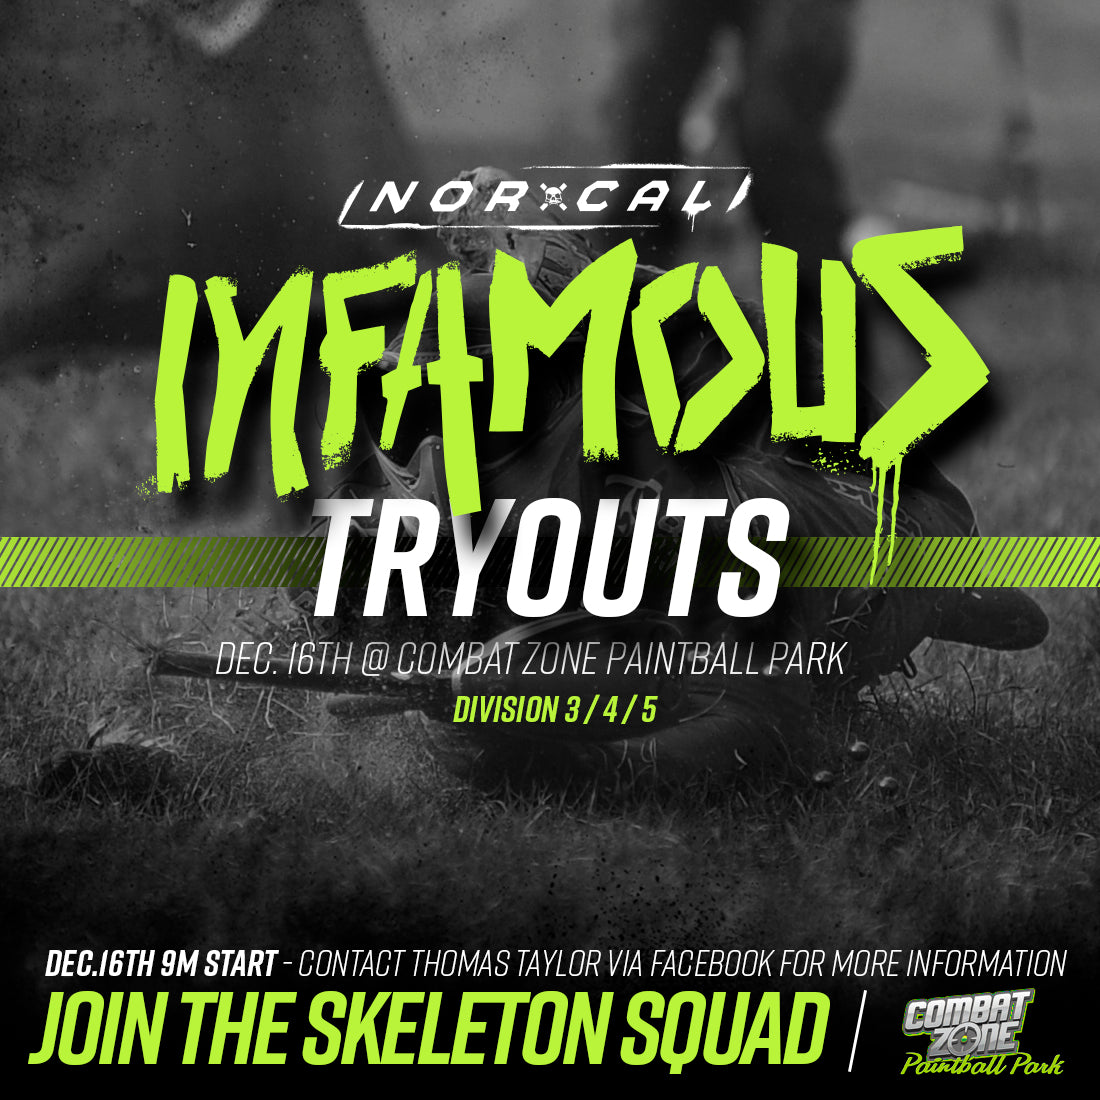 NOR-CAL Infamous Tryouts